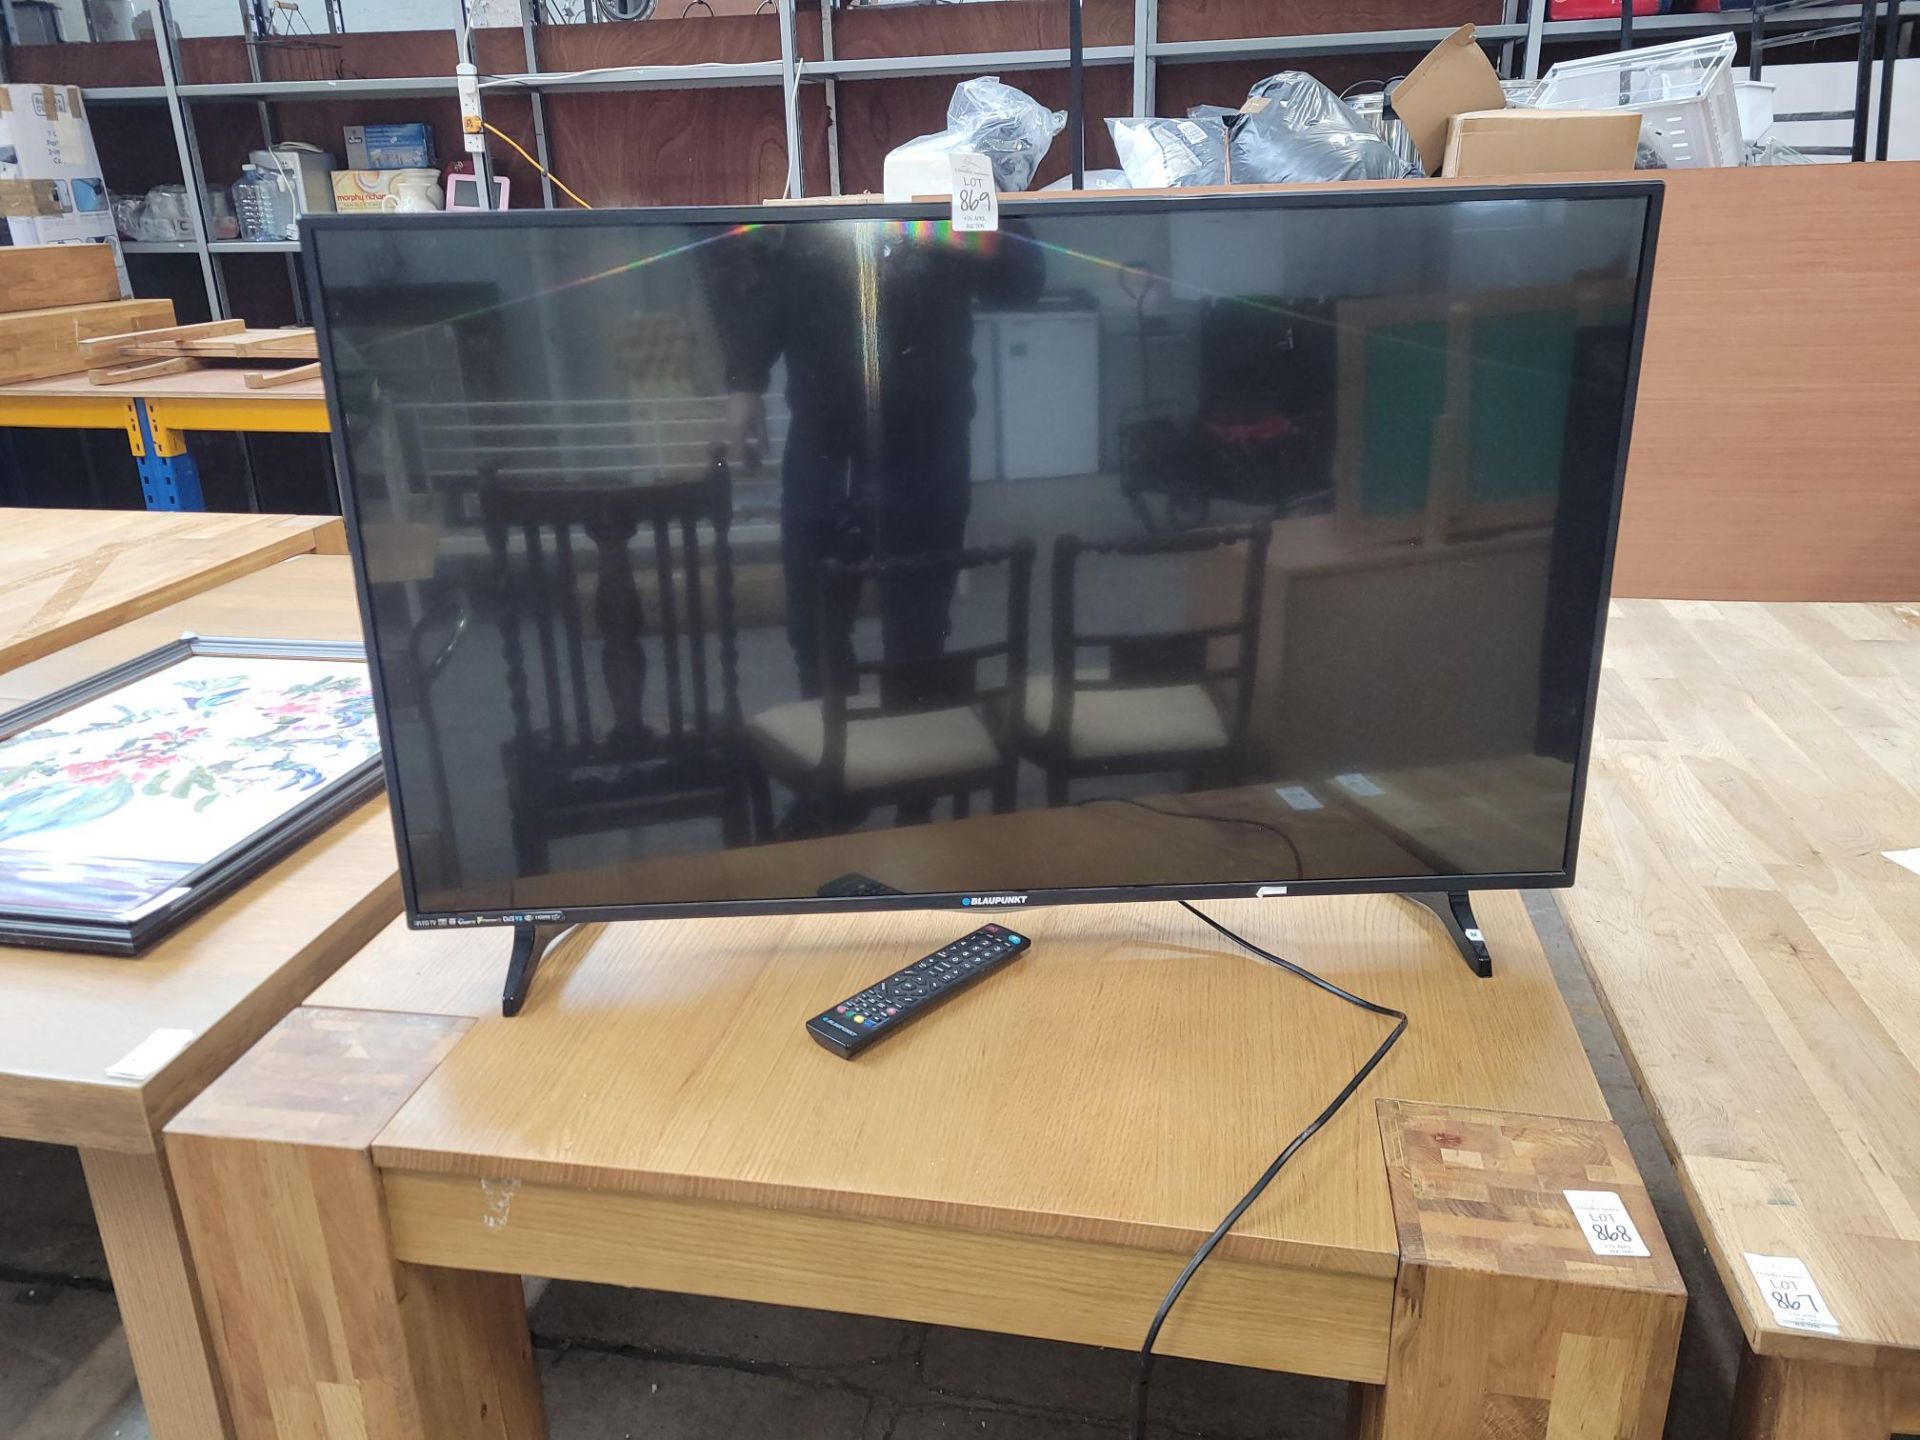 43" IN LED BLAUPUNKT TV AND REMOTE (WORKING)